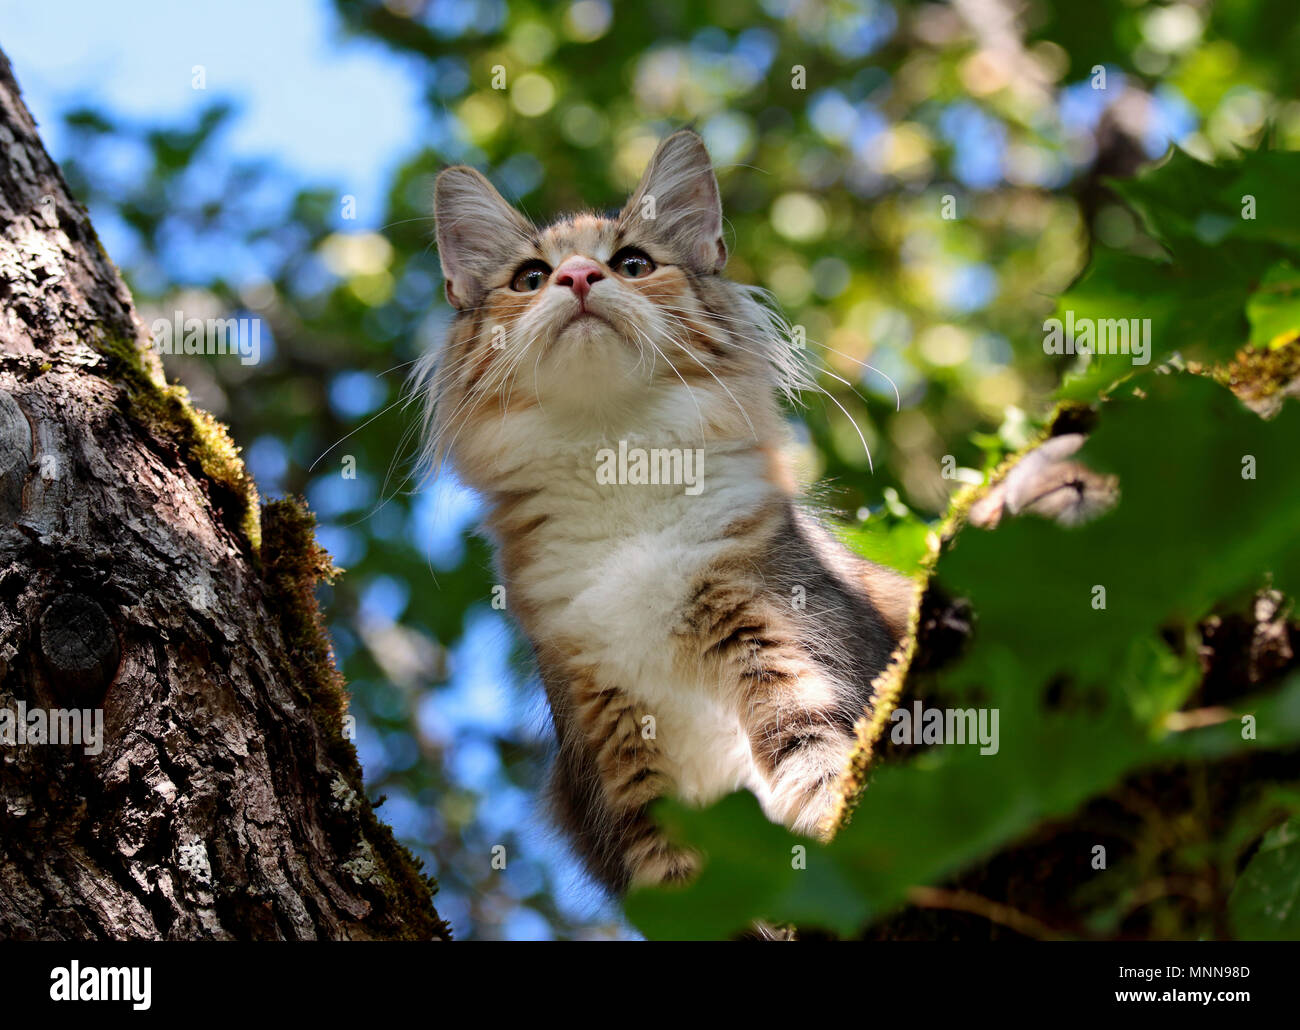 Norwegian forest cat is on tree Stock Photo